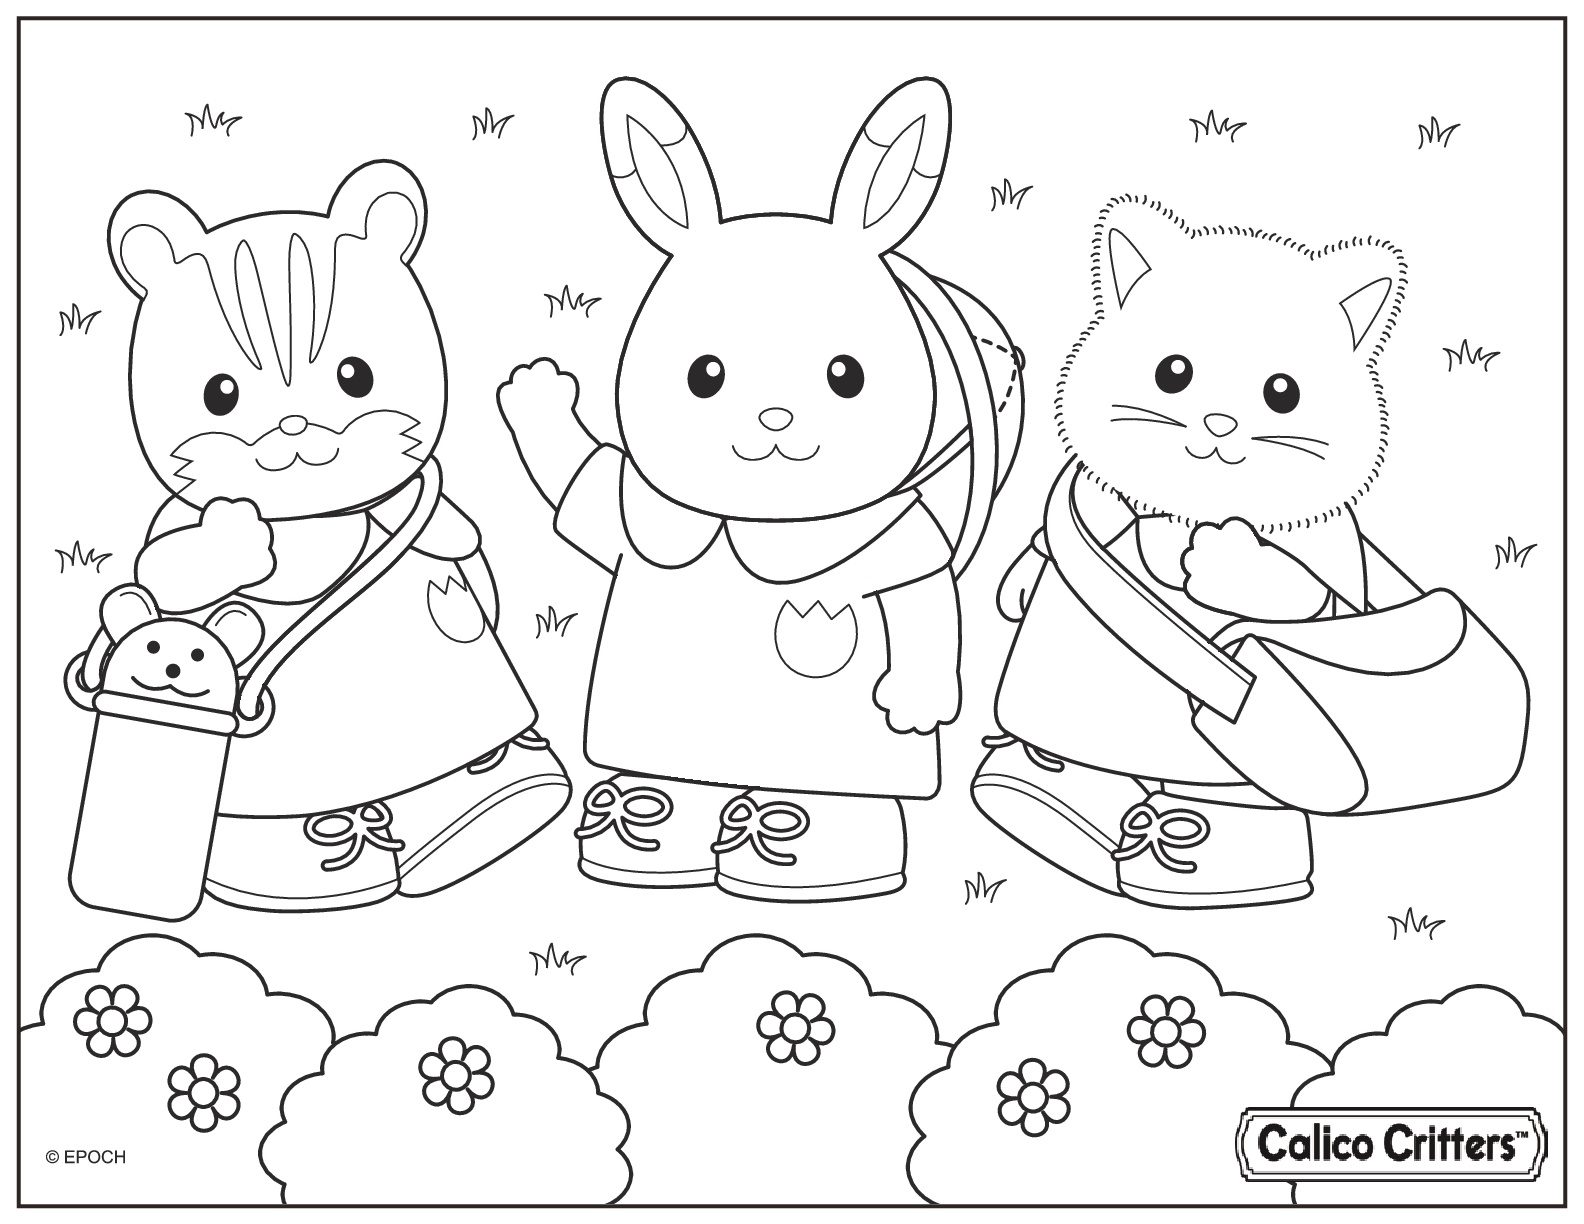 Calico Critters In The Park